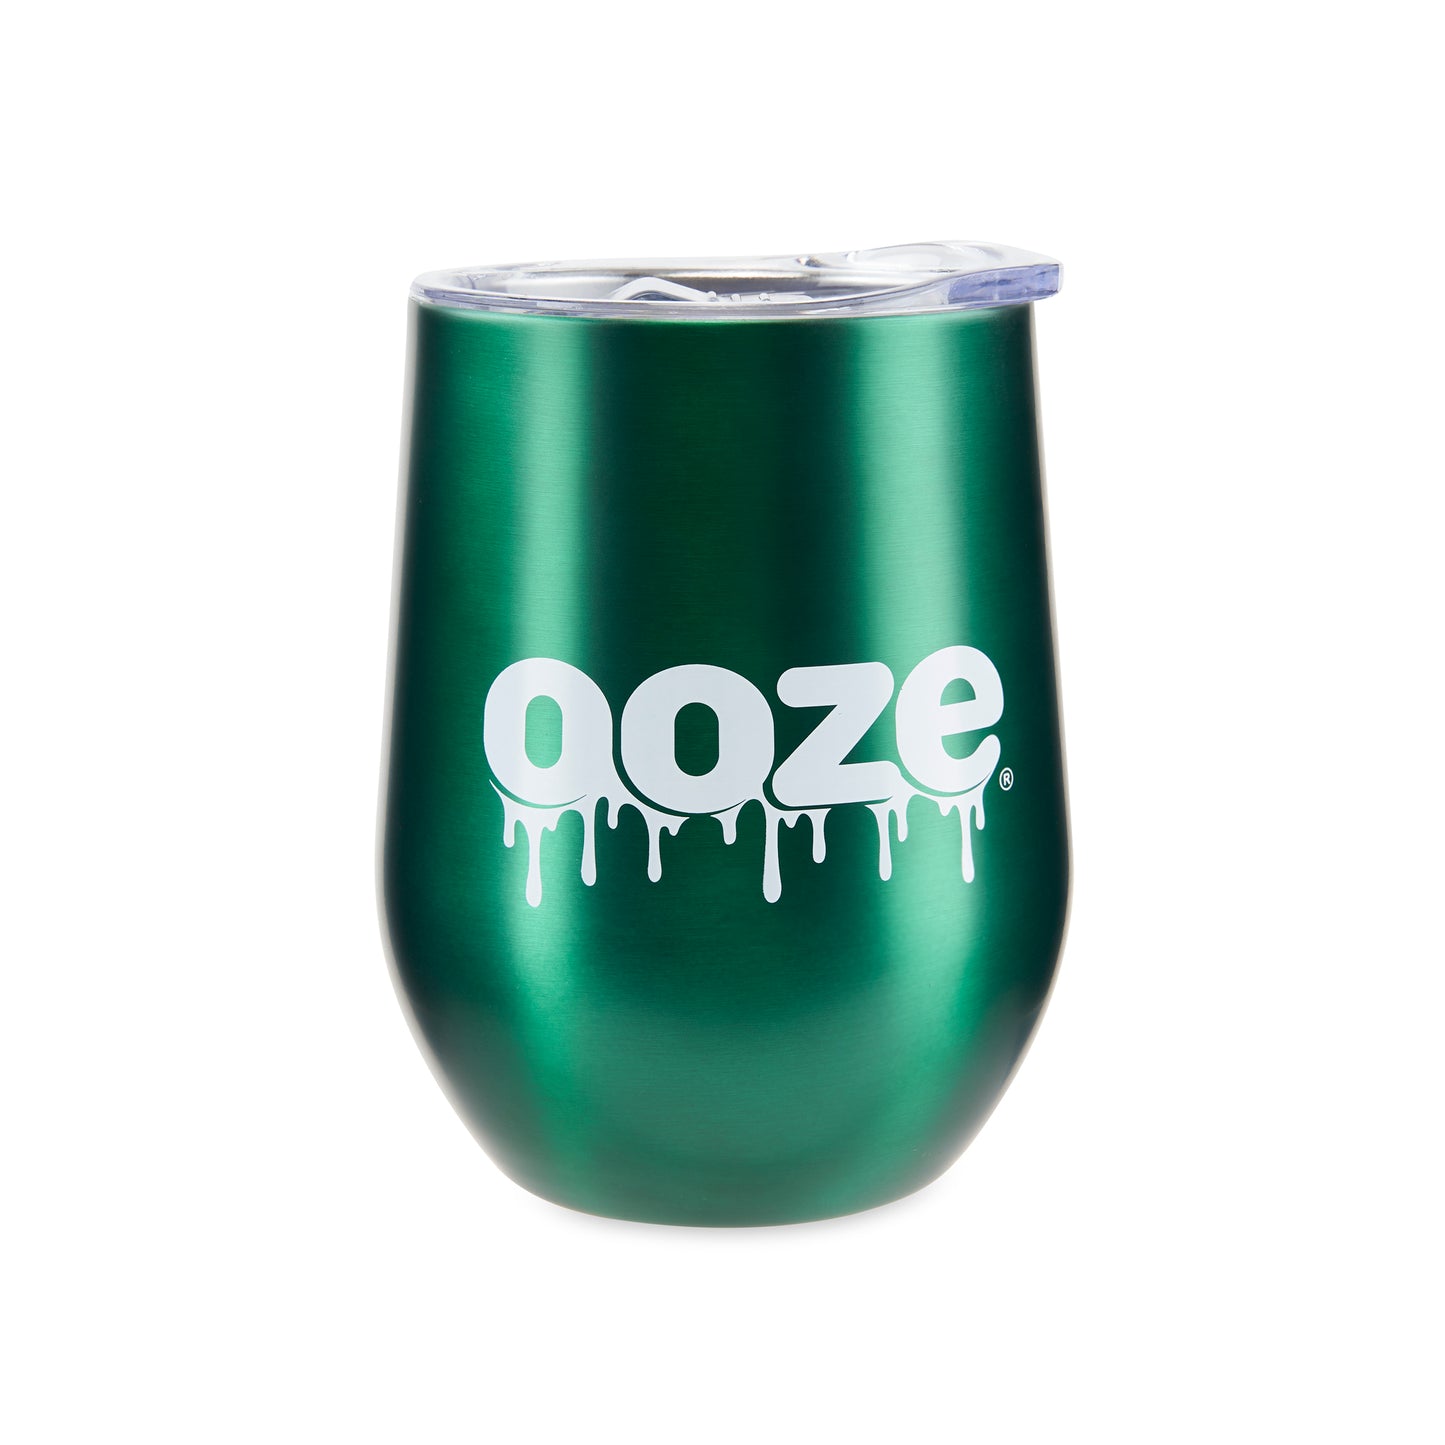 The green 12oz Ooze Tumbler viewed straight-on.